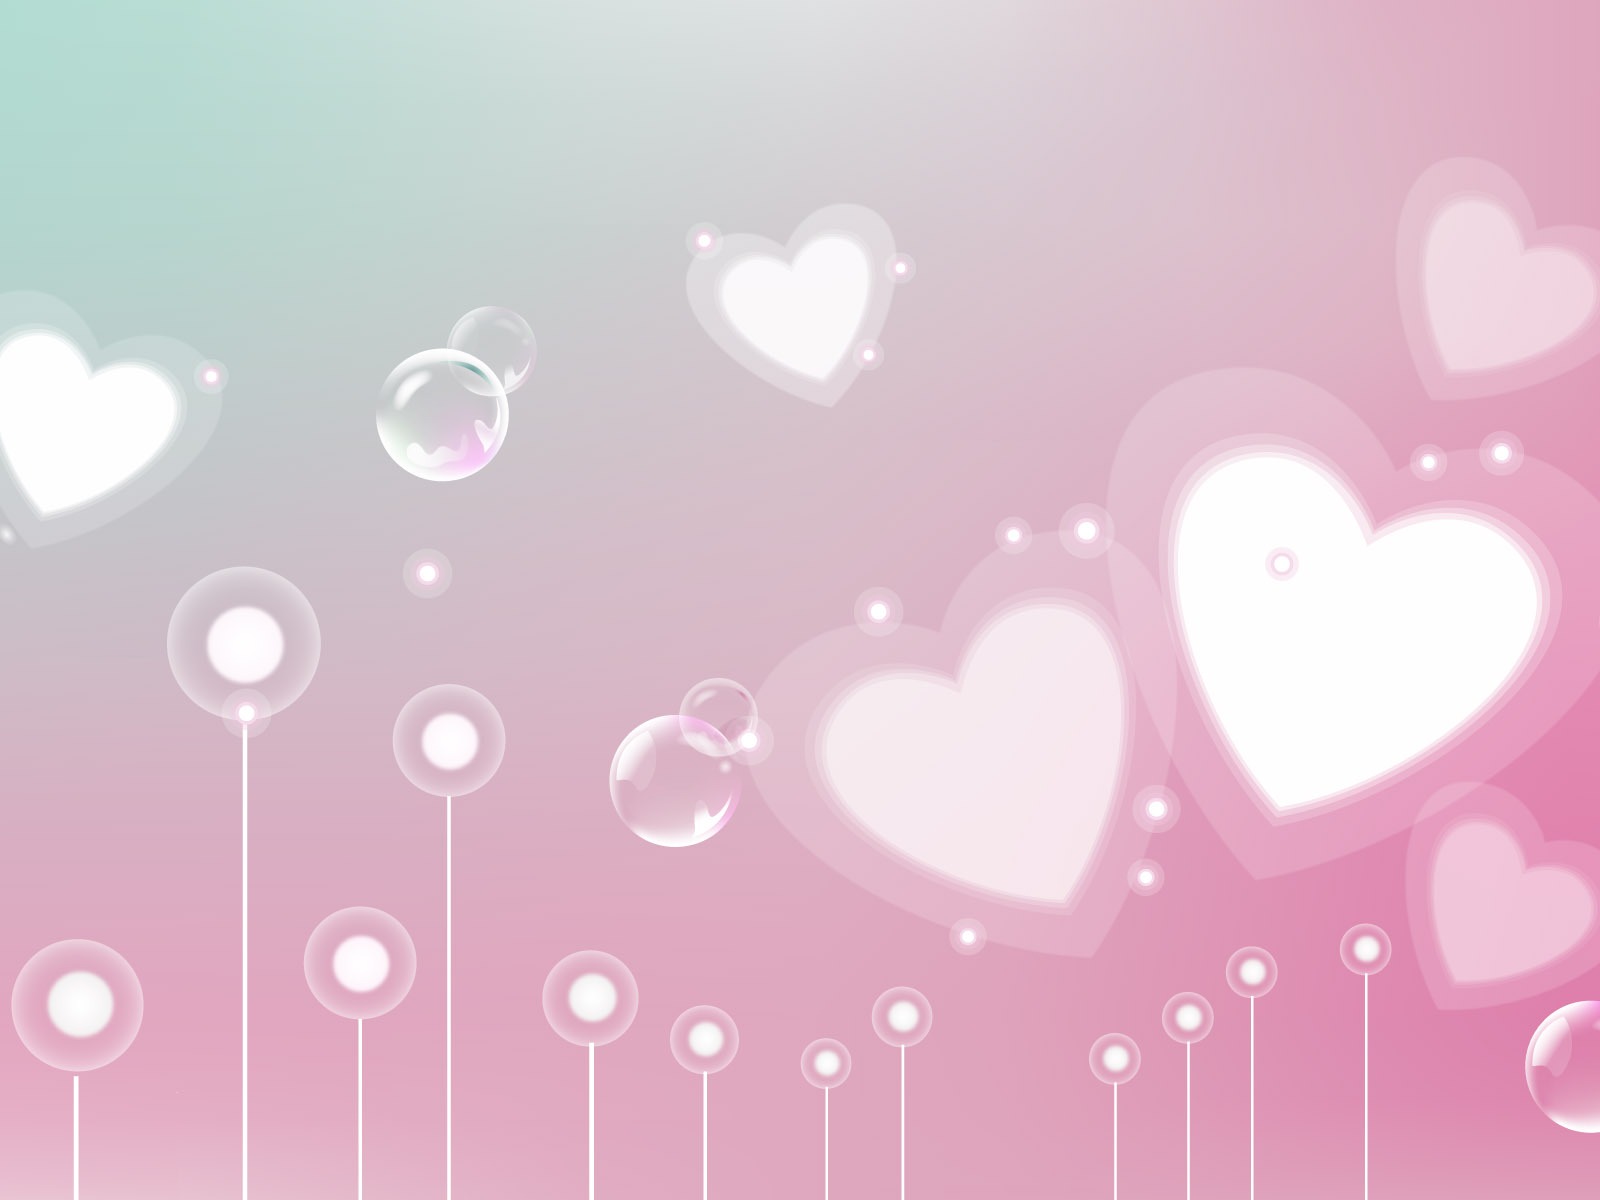 Valentine's Day Love Theme Wallpapers (2) #18 - 1600x1200